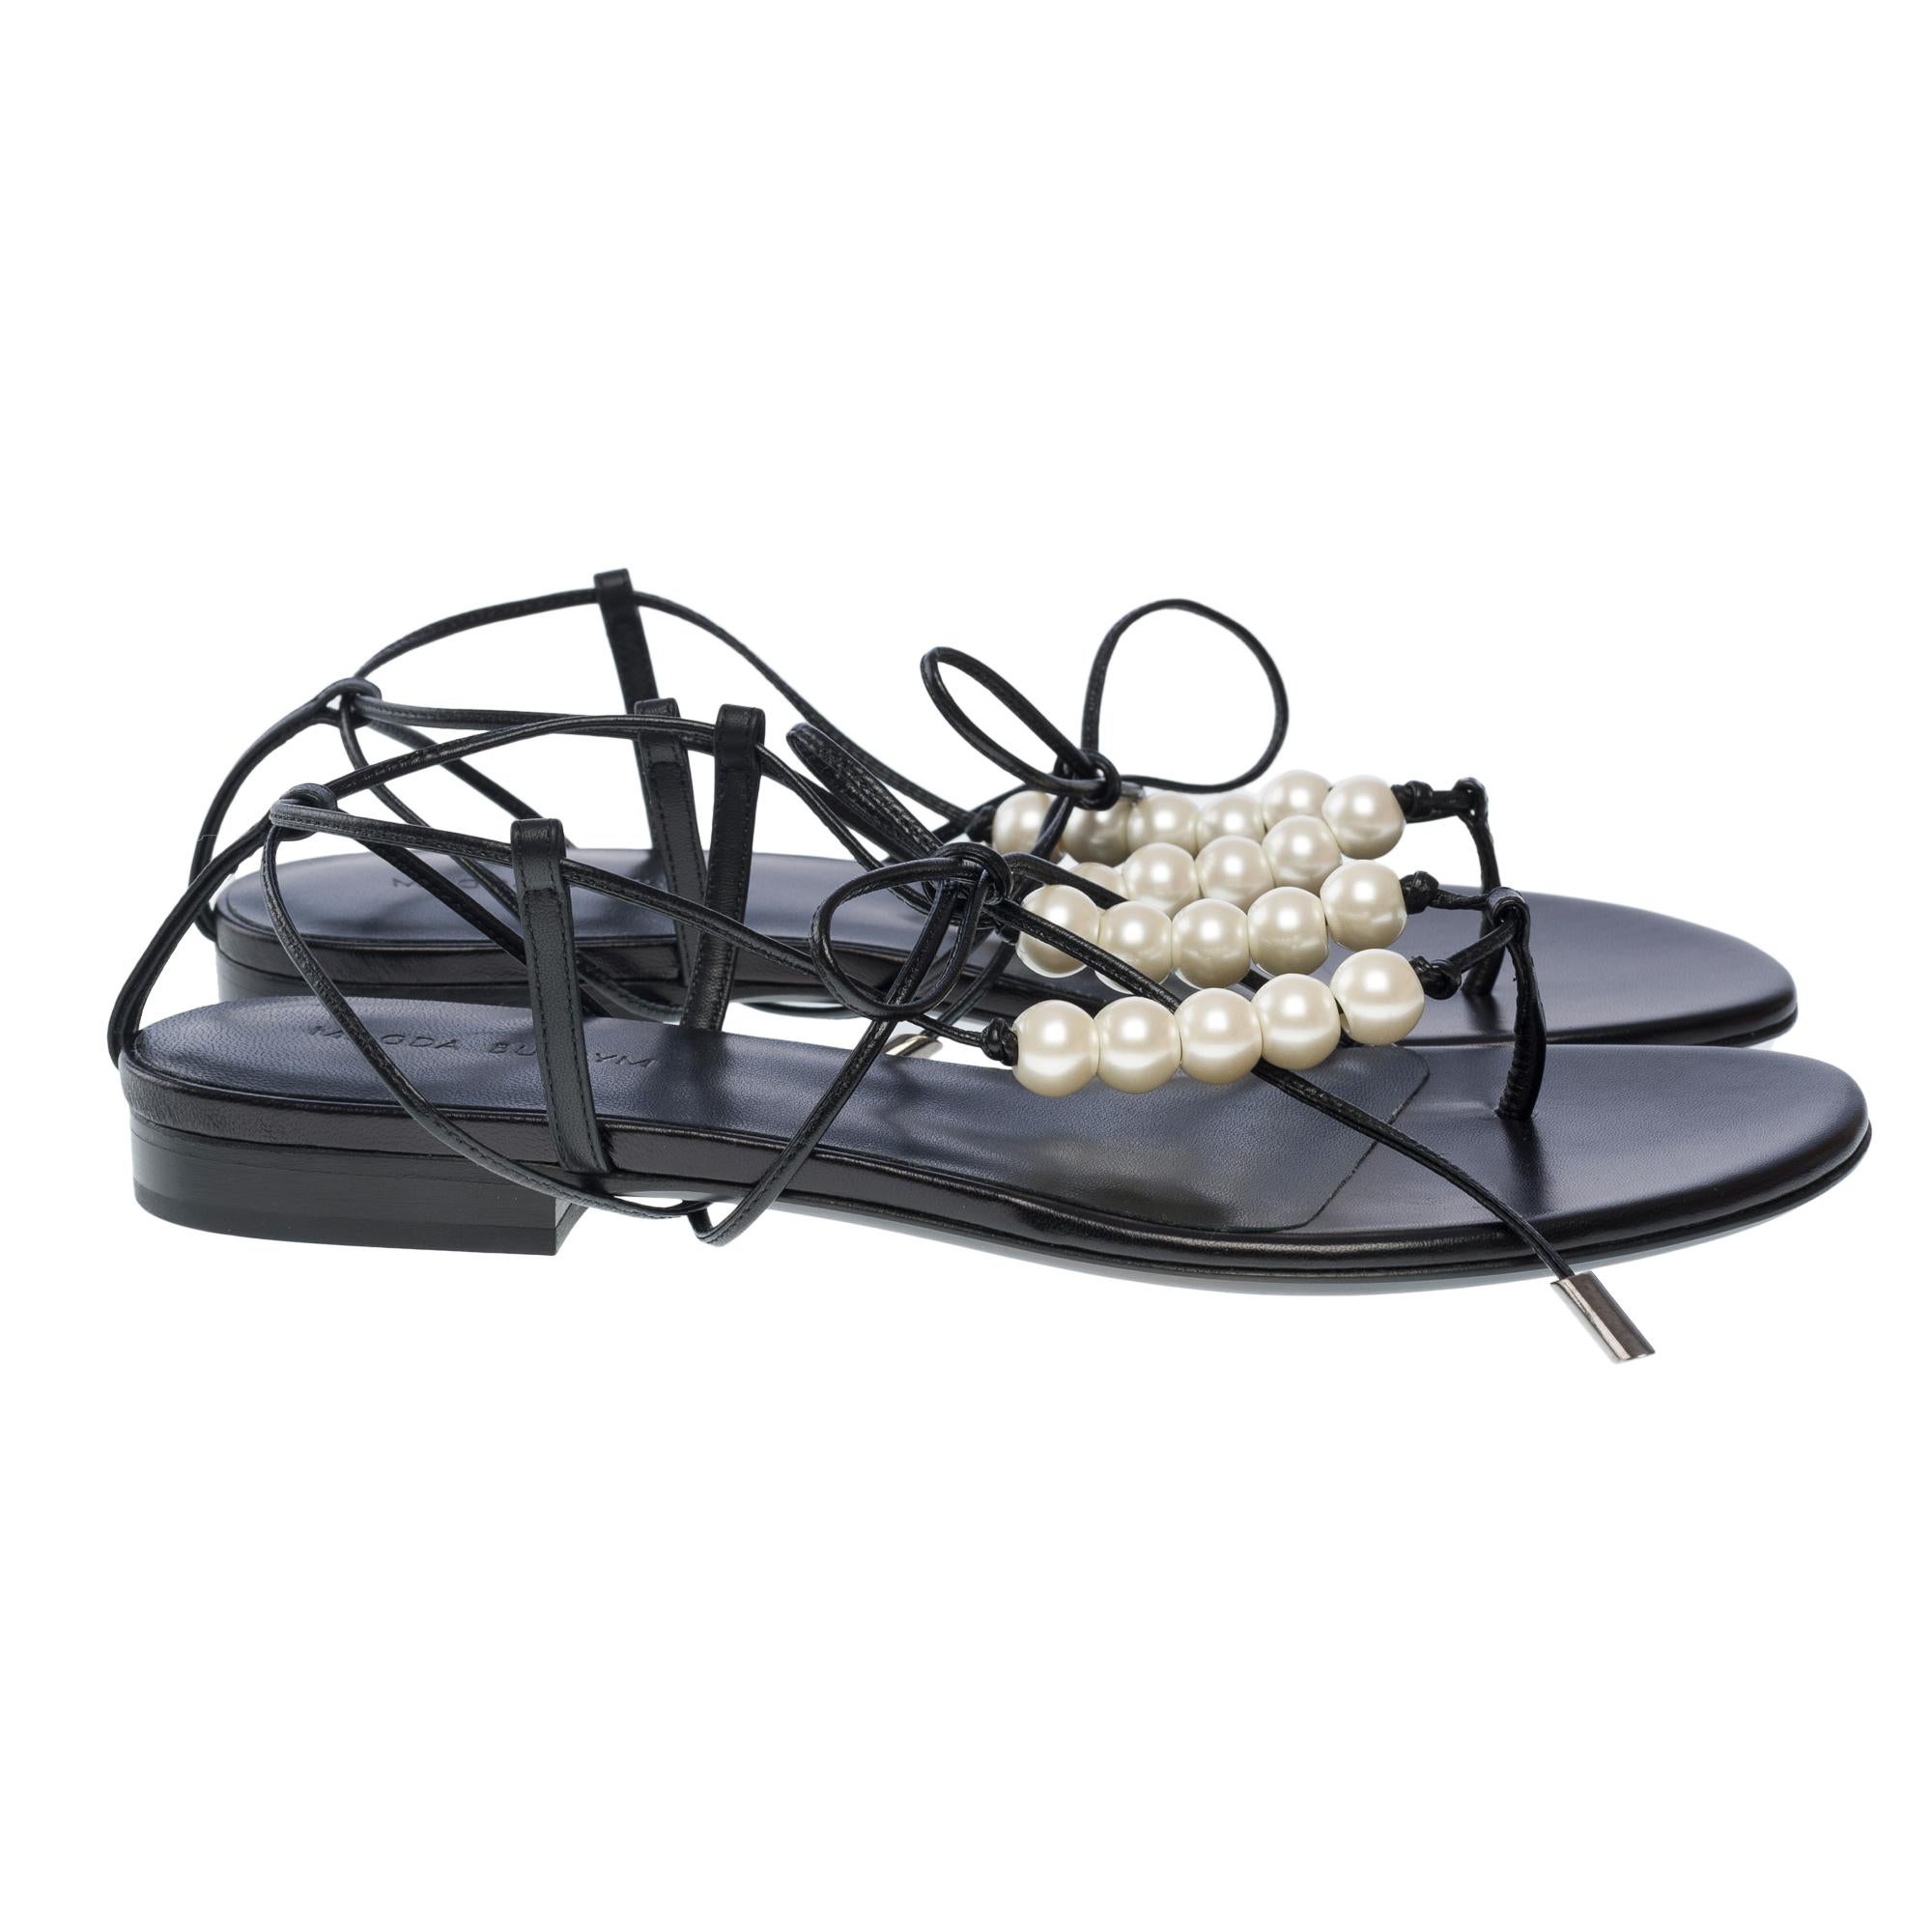 New Magda Butrym Flat Sandals  in black leather and faux-pearl , Size 38 For Sale 2